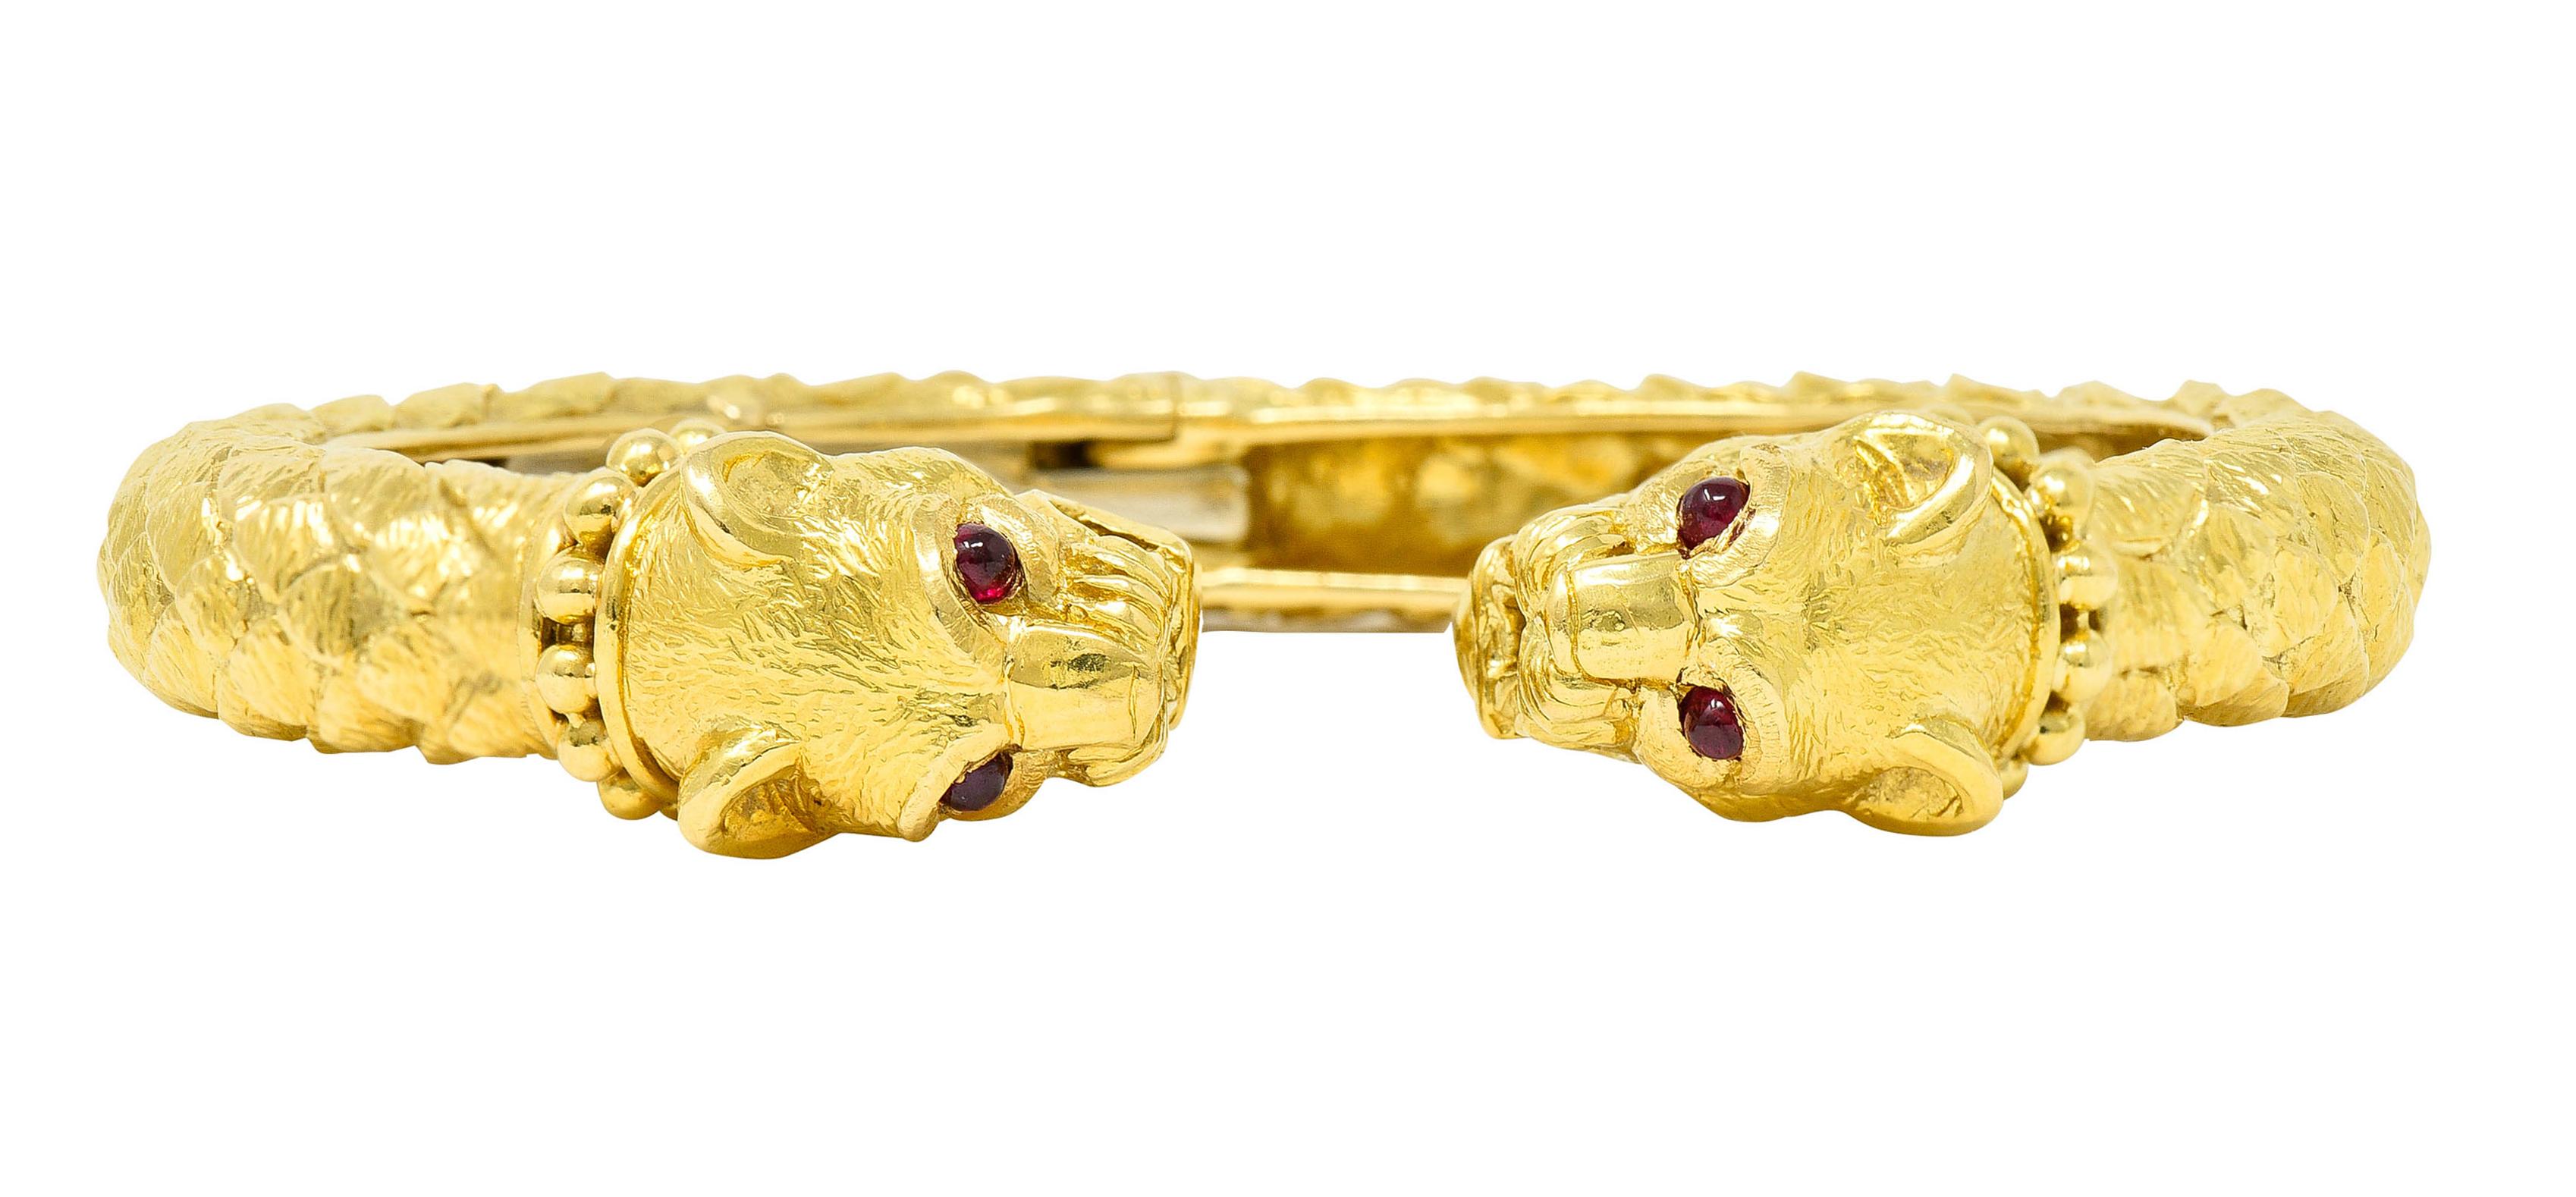 Cuff bracelet designed as two stylized lion heads with texturous scales

Featuring gold bead collars, detailed snarling faces, and textured fur 

Each lion head has two 2.5 mm round ruby cabochon eyes

Rubies are well matched medium in saturation